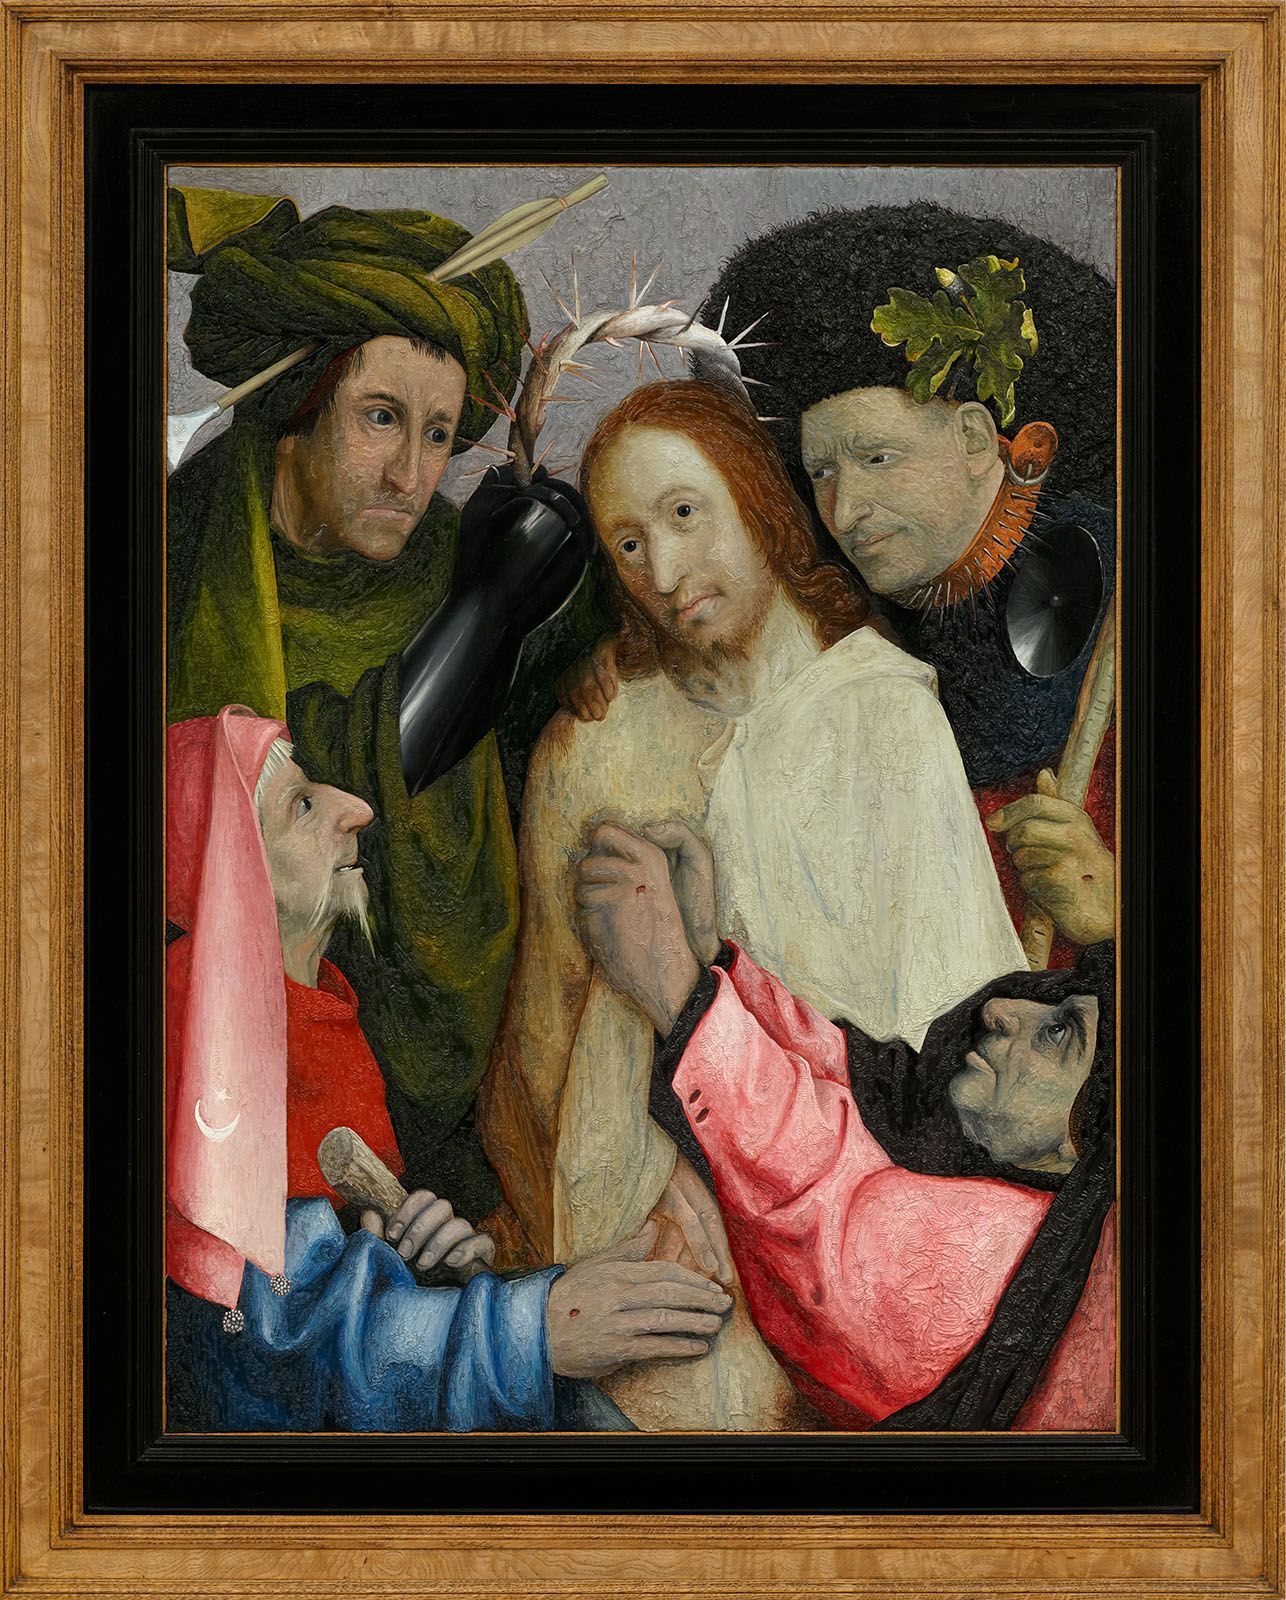 Copy of Christ Mocked by Hieronymus Bosch by Mark Alexander with wrinkling effect.